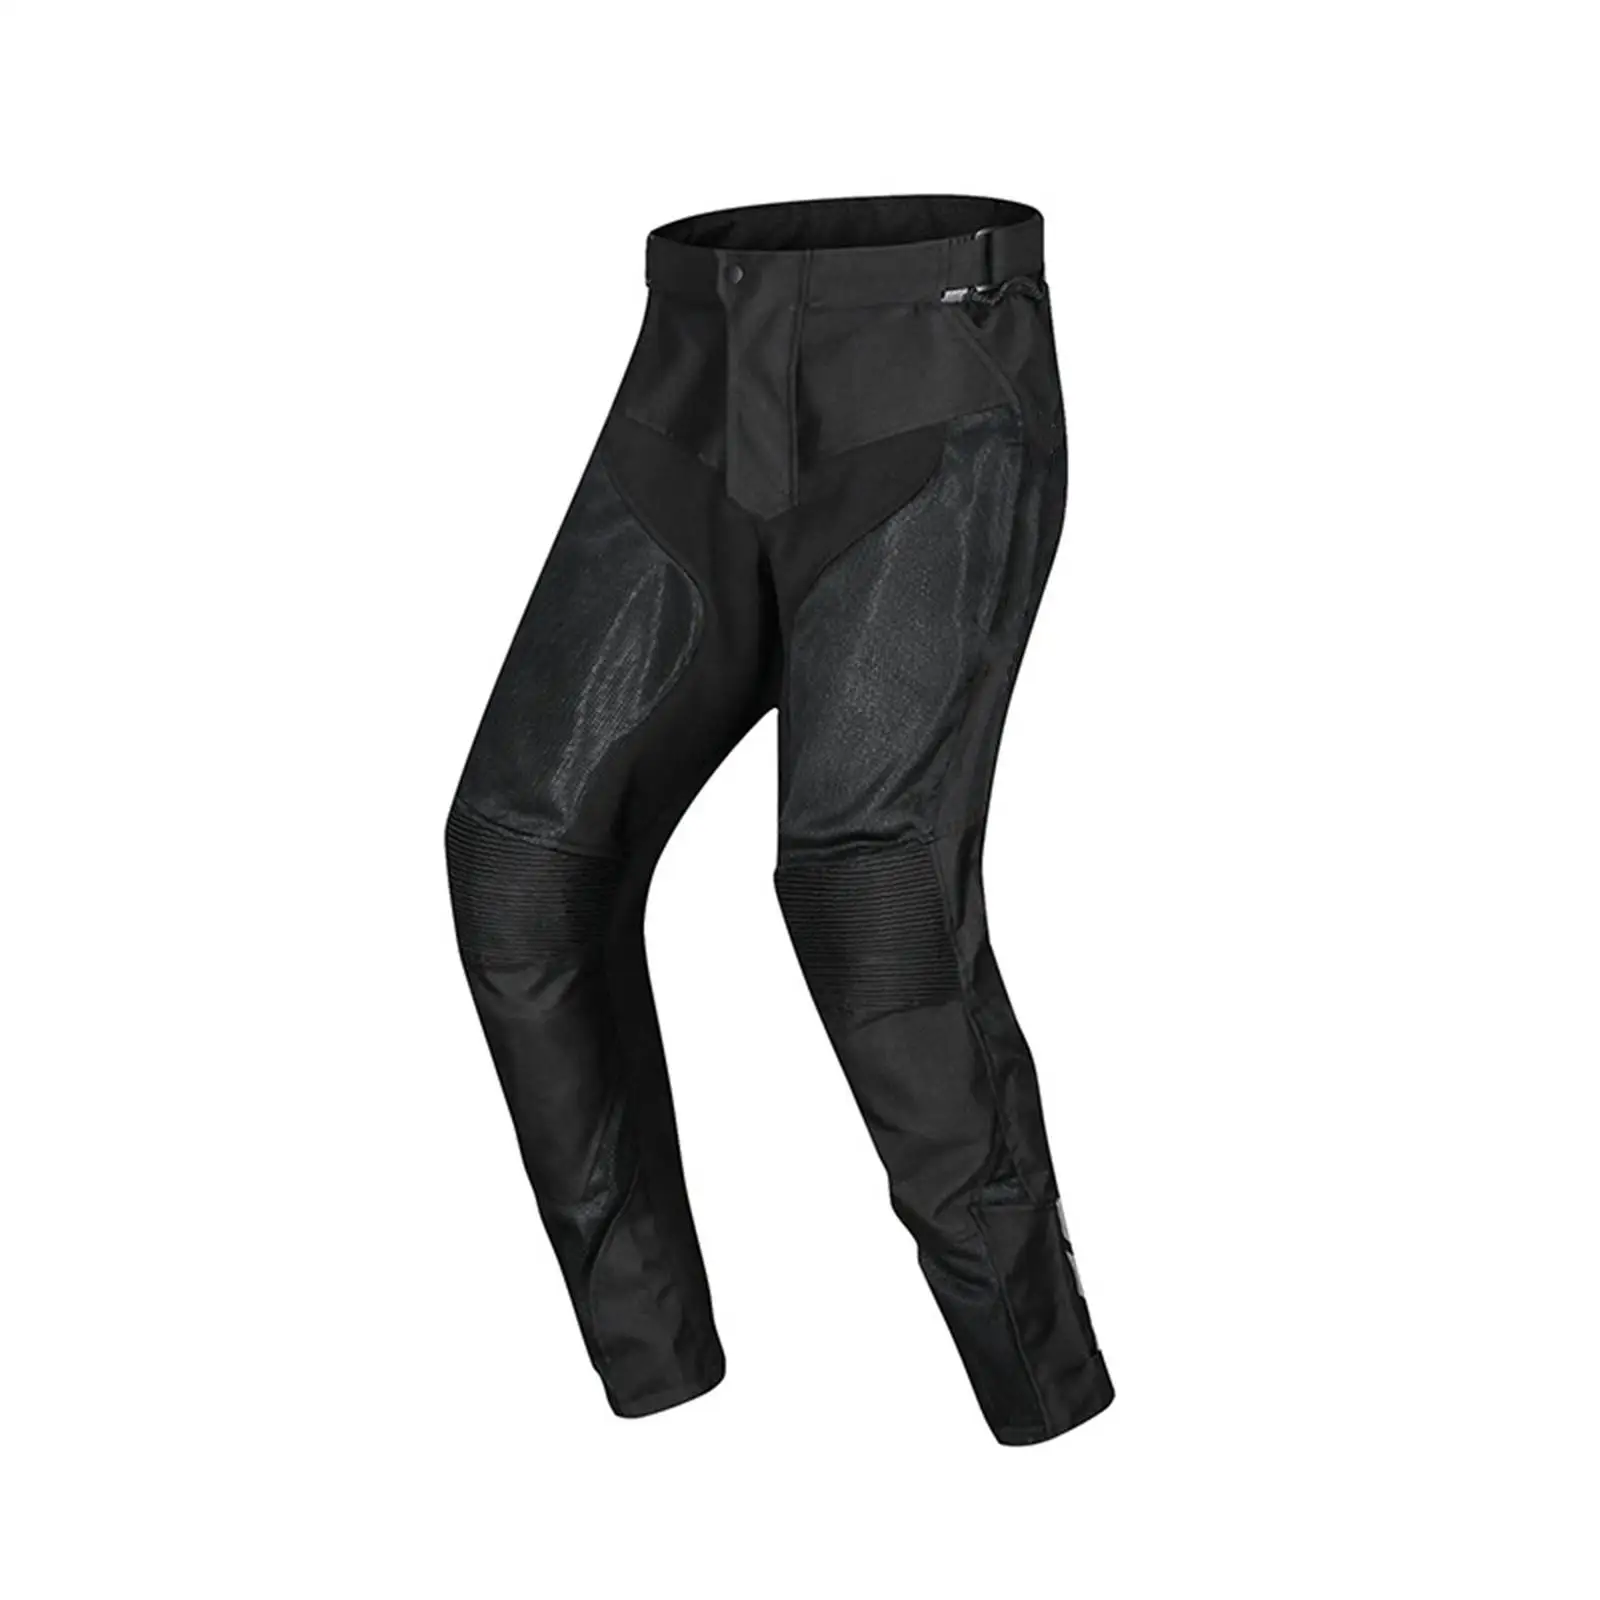 All season motorcycle pants for motocross racers for men and women